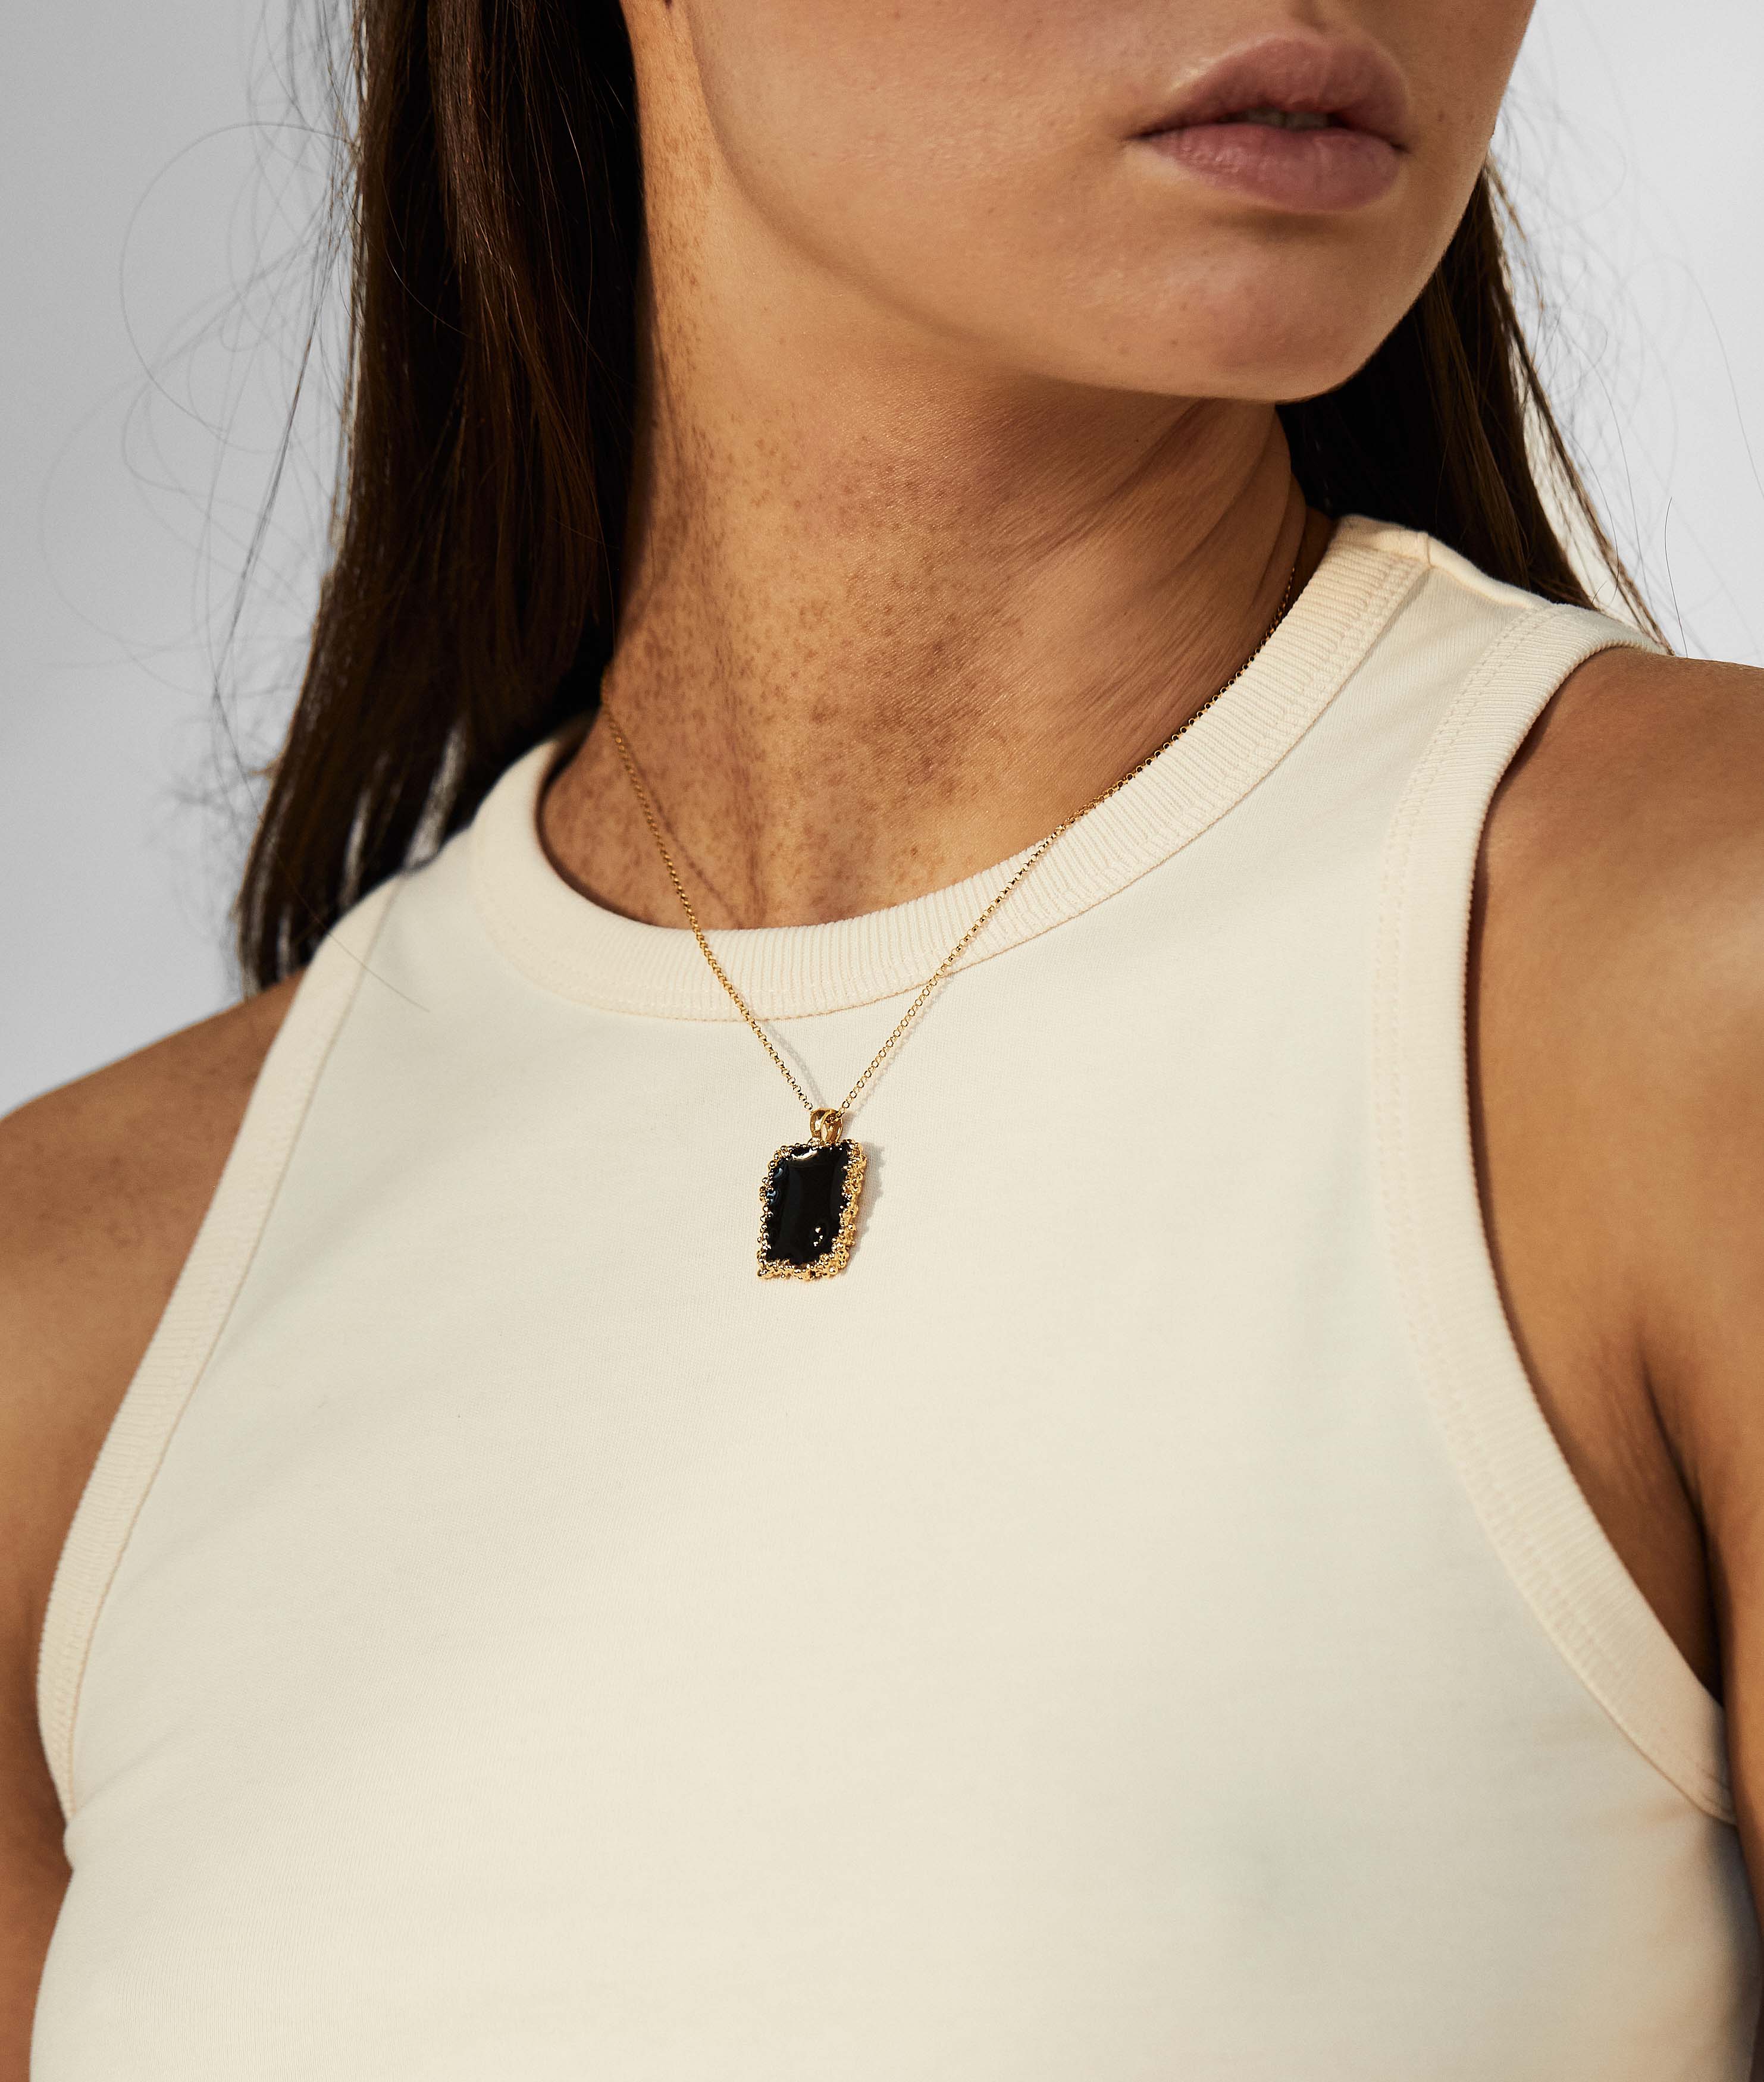 The Inkwell Vignette Necklace